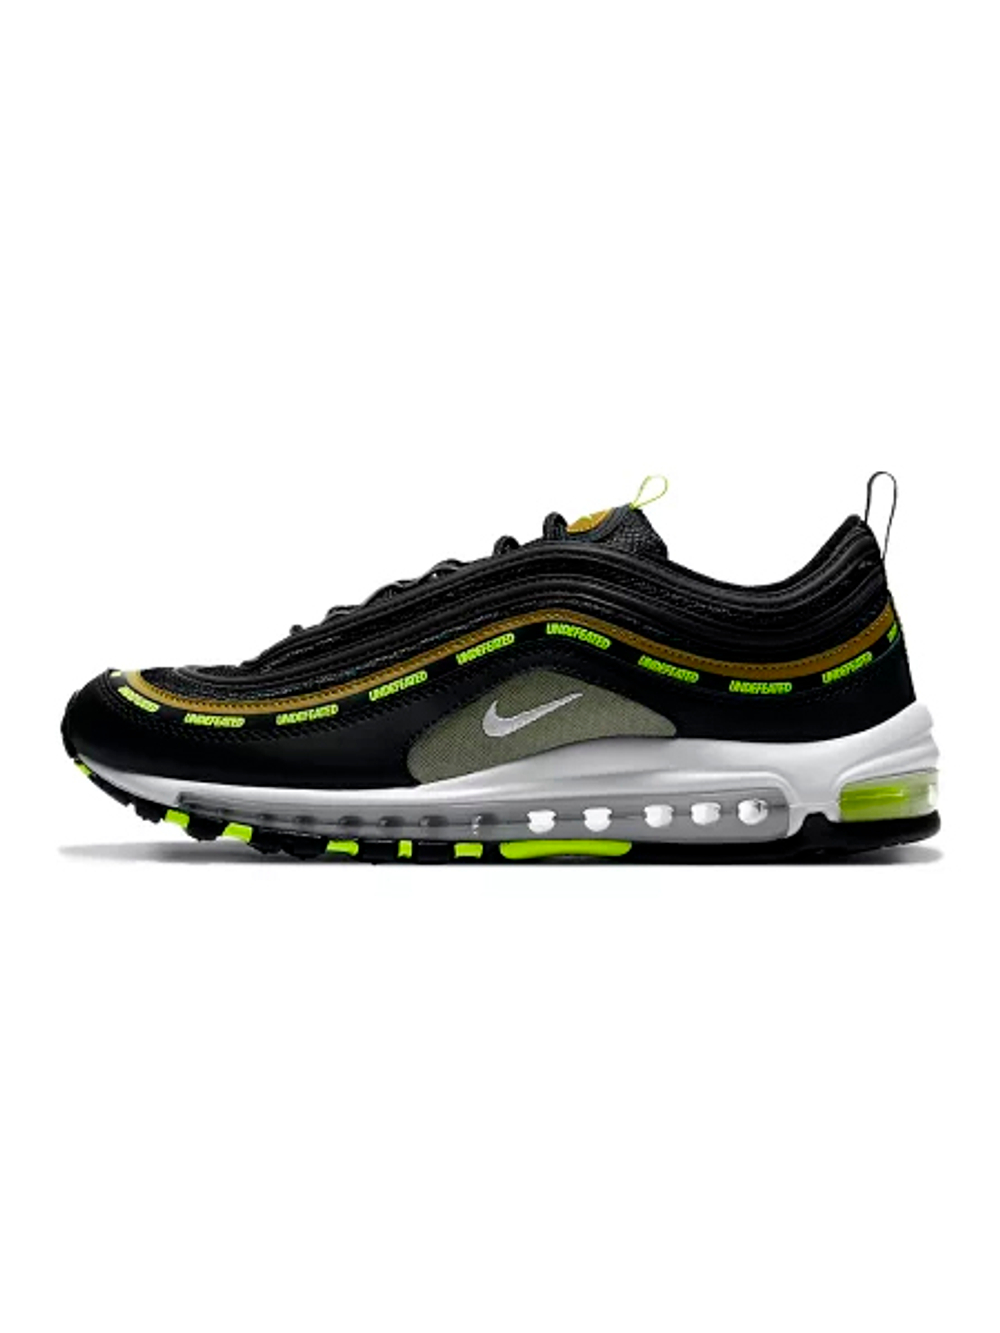 NIKE UNDEFEATED X AIR MAX 97 'BLACK VOLT"  DC4830-001